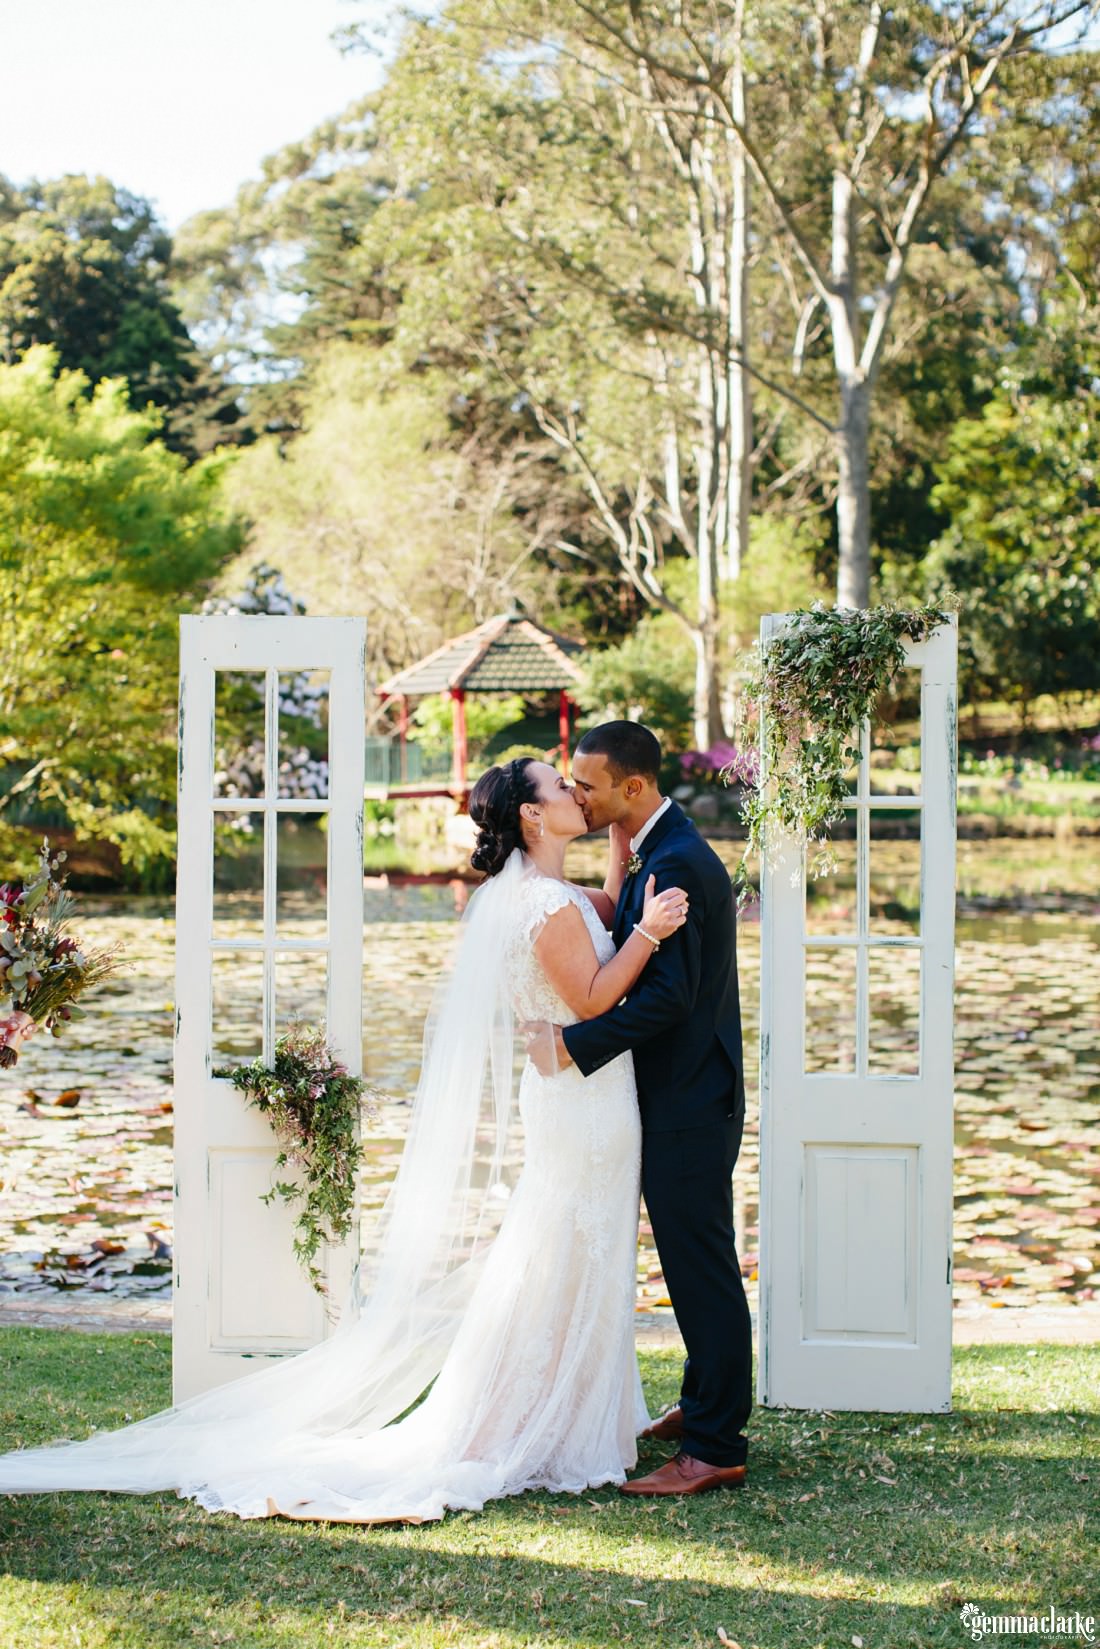 A bride and groom kiss at their ceremony